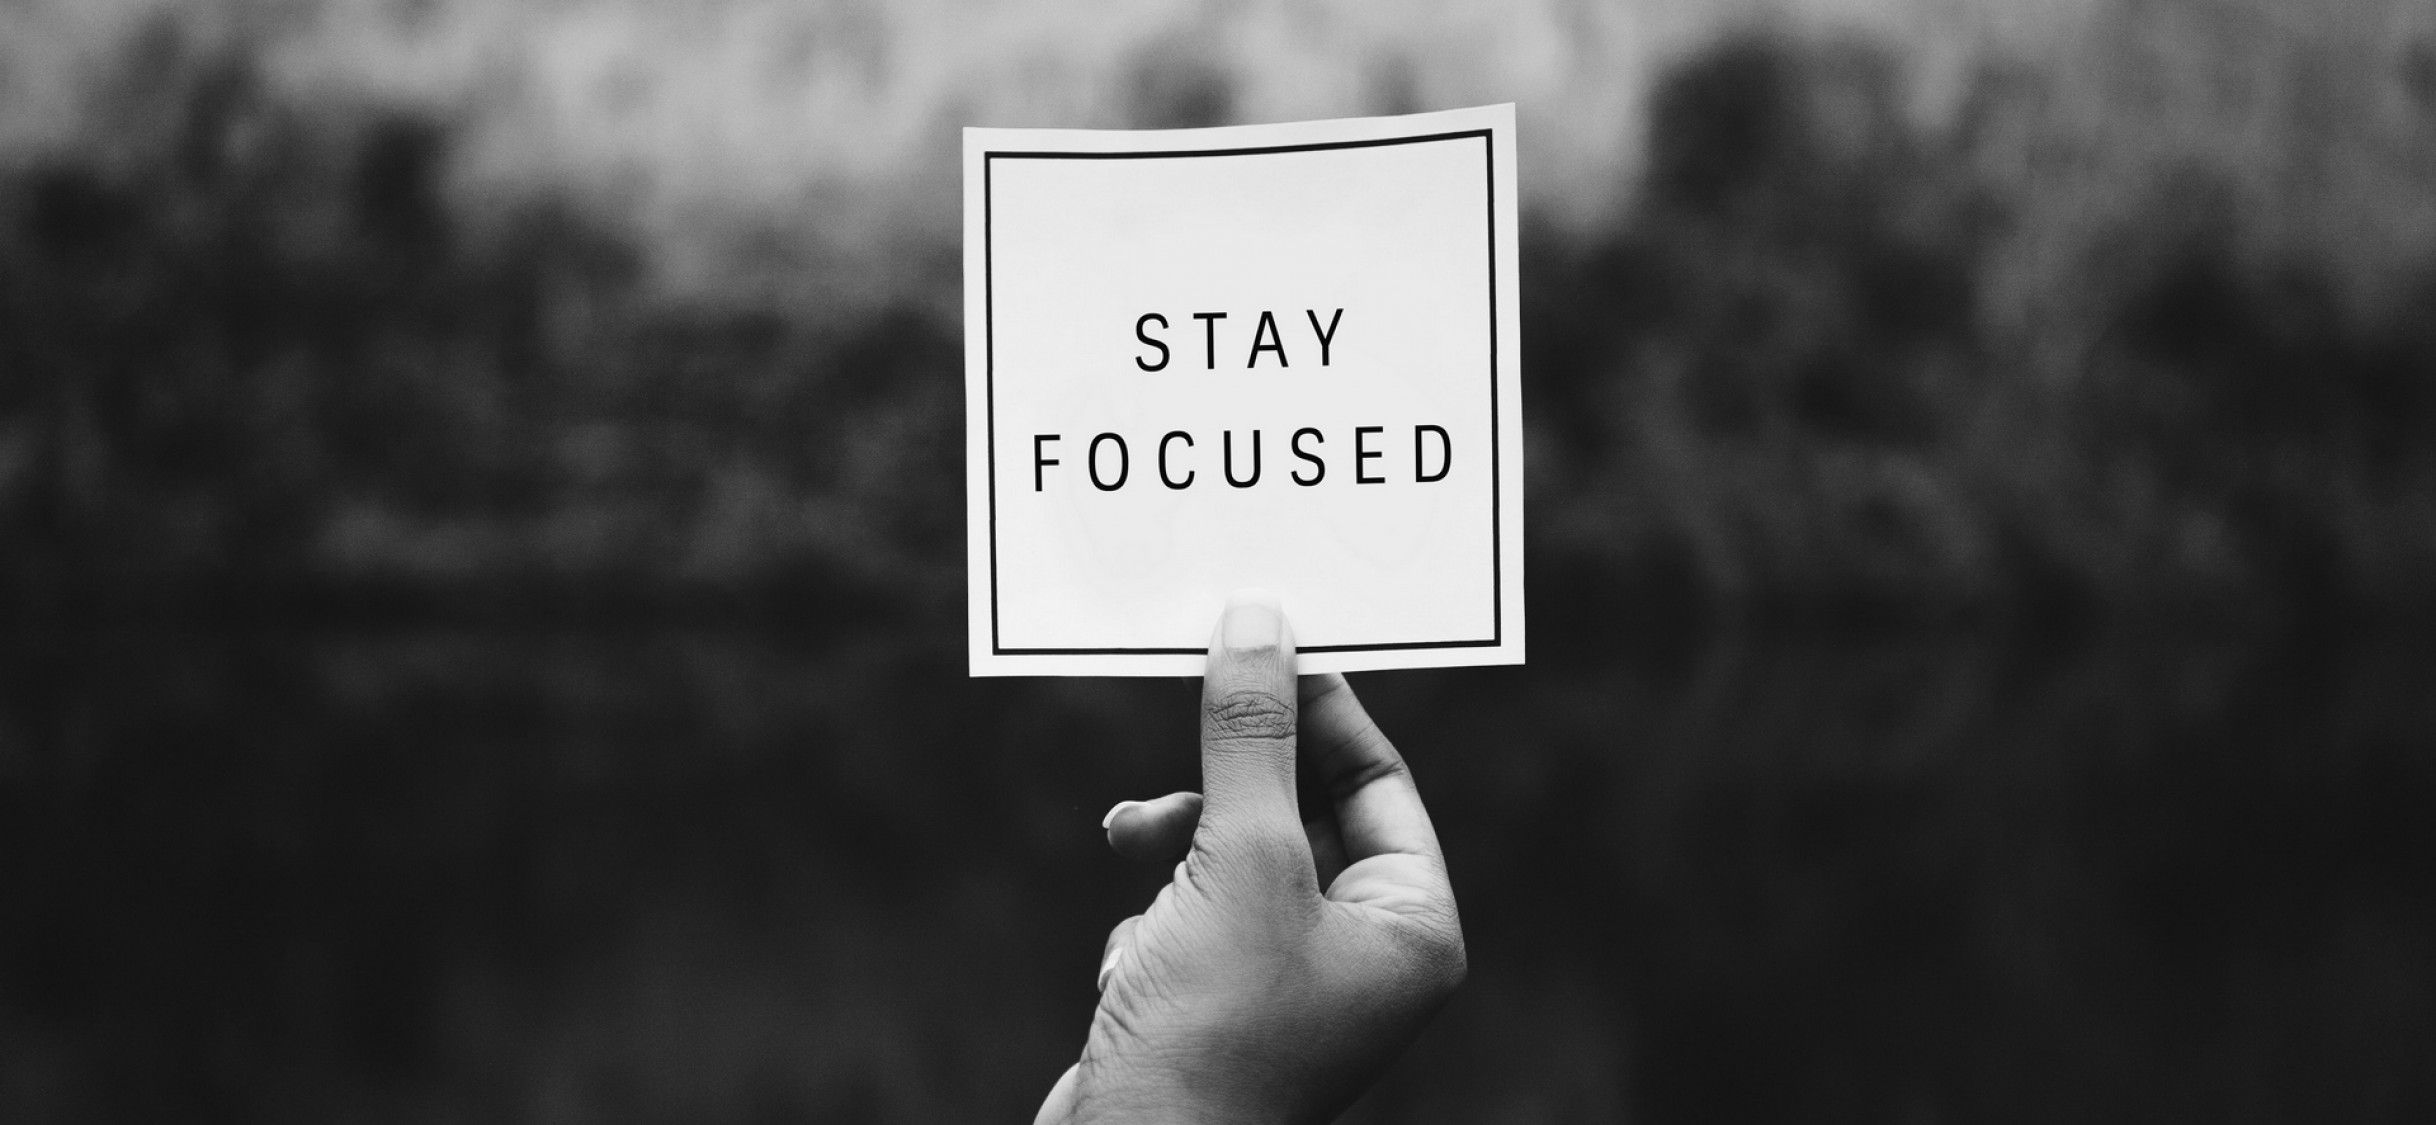 Stay focused HD Wallpaper iPhone X